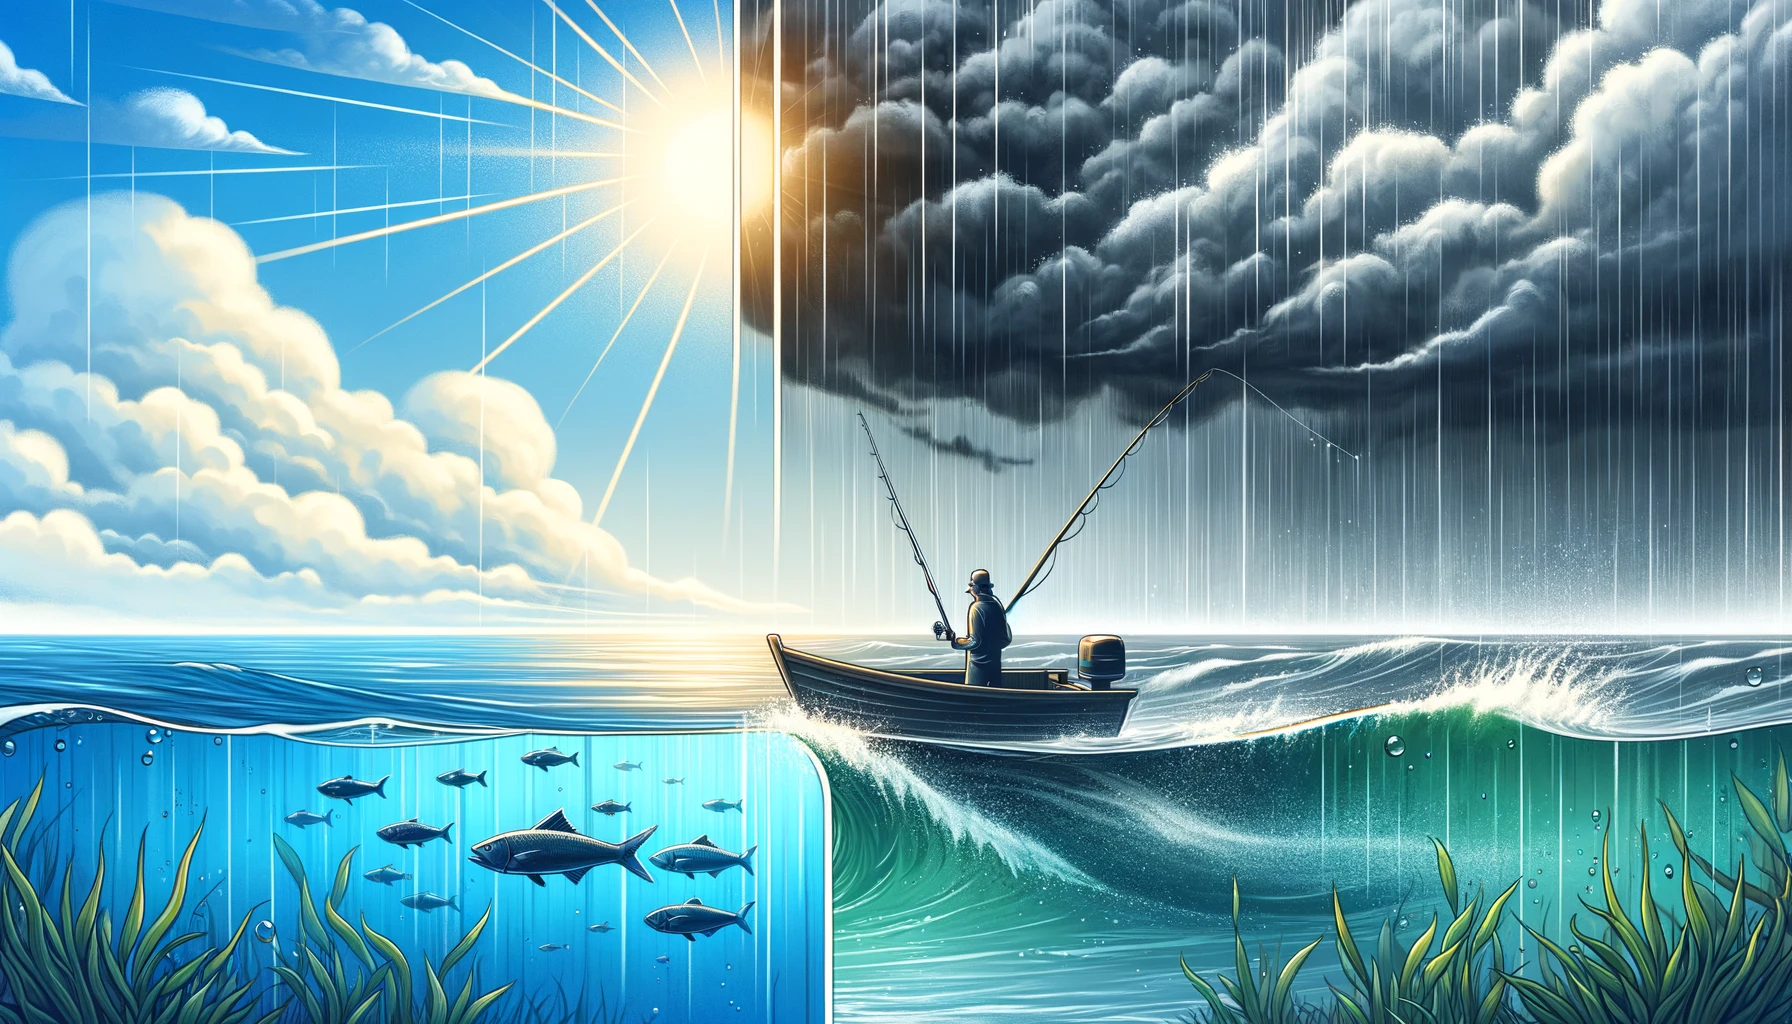 What is the relationship between the weather and fishing?